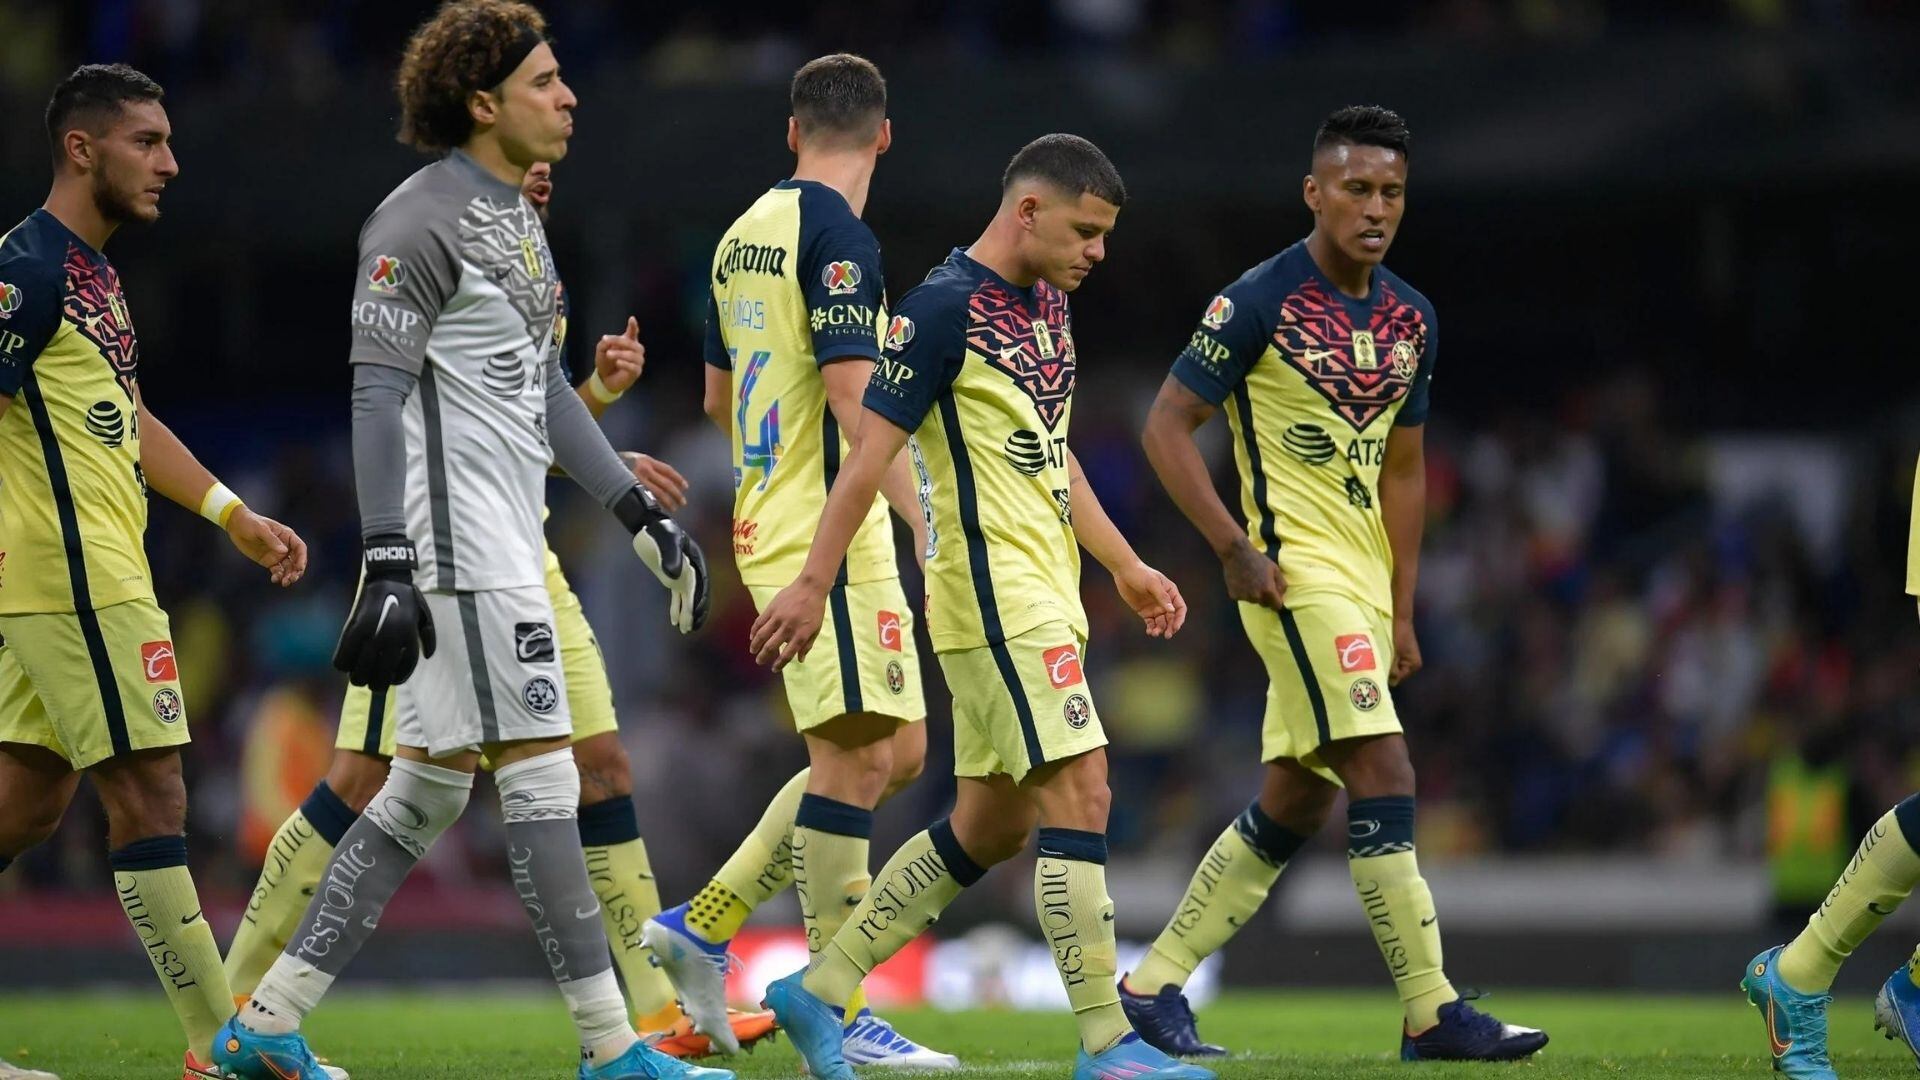 Now that he lost his place in Club América’s lineup, he’s asking to leave Las Águilas